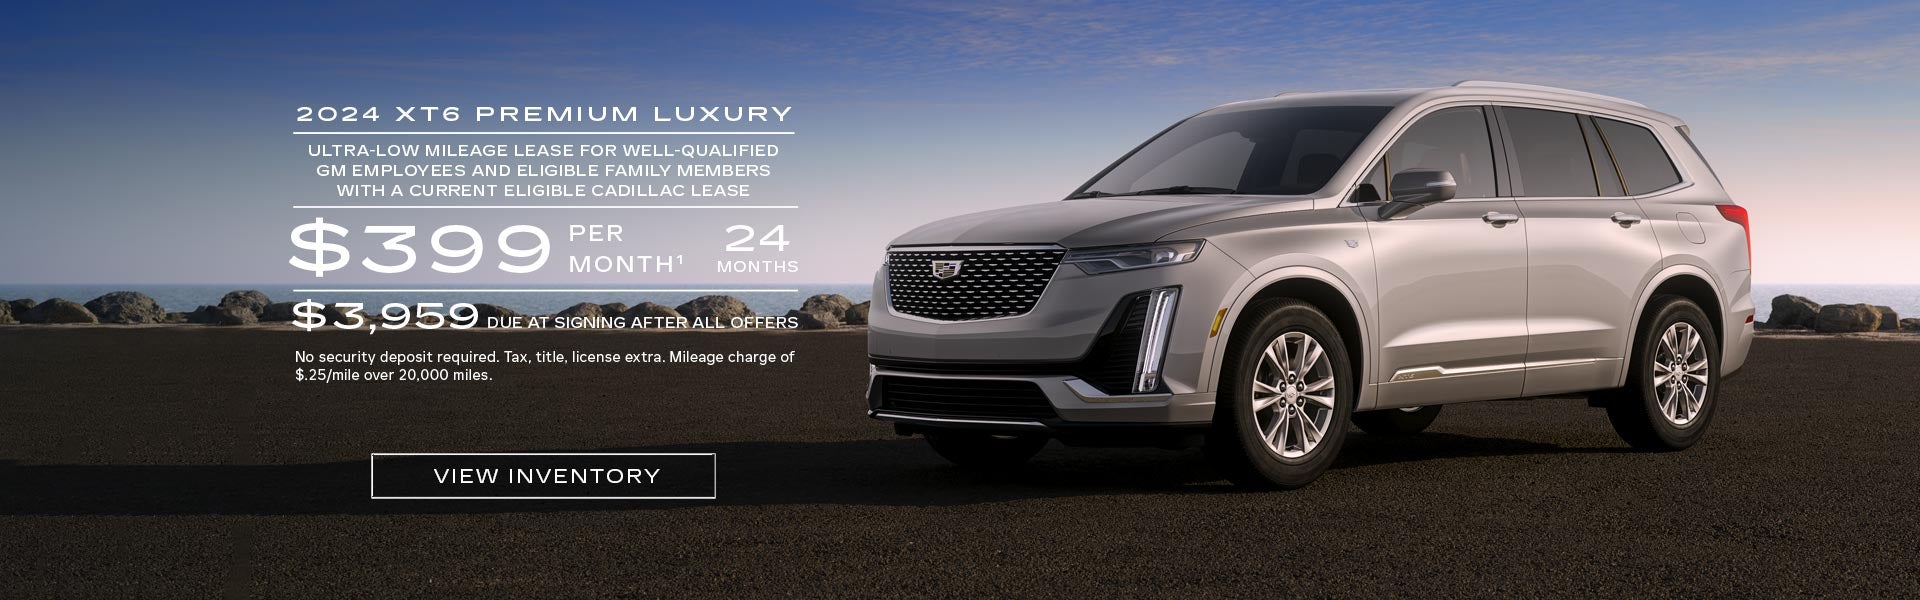 2024 XT6 Premium Luxury. Ultra-low mileage lease for well-qualified current eligible GM employees...